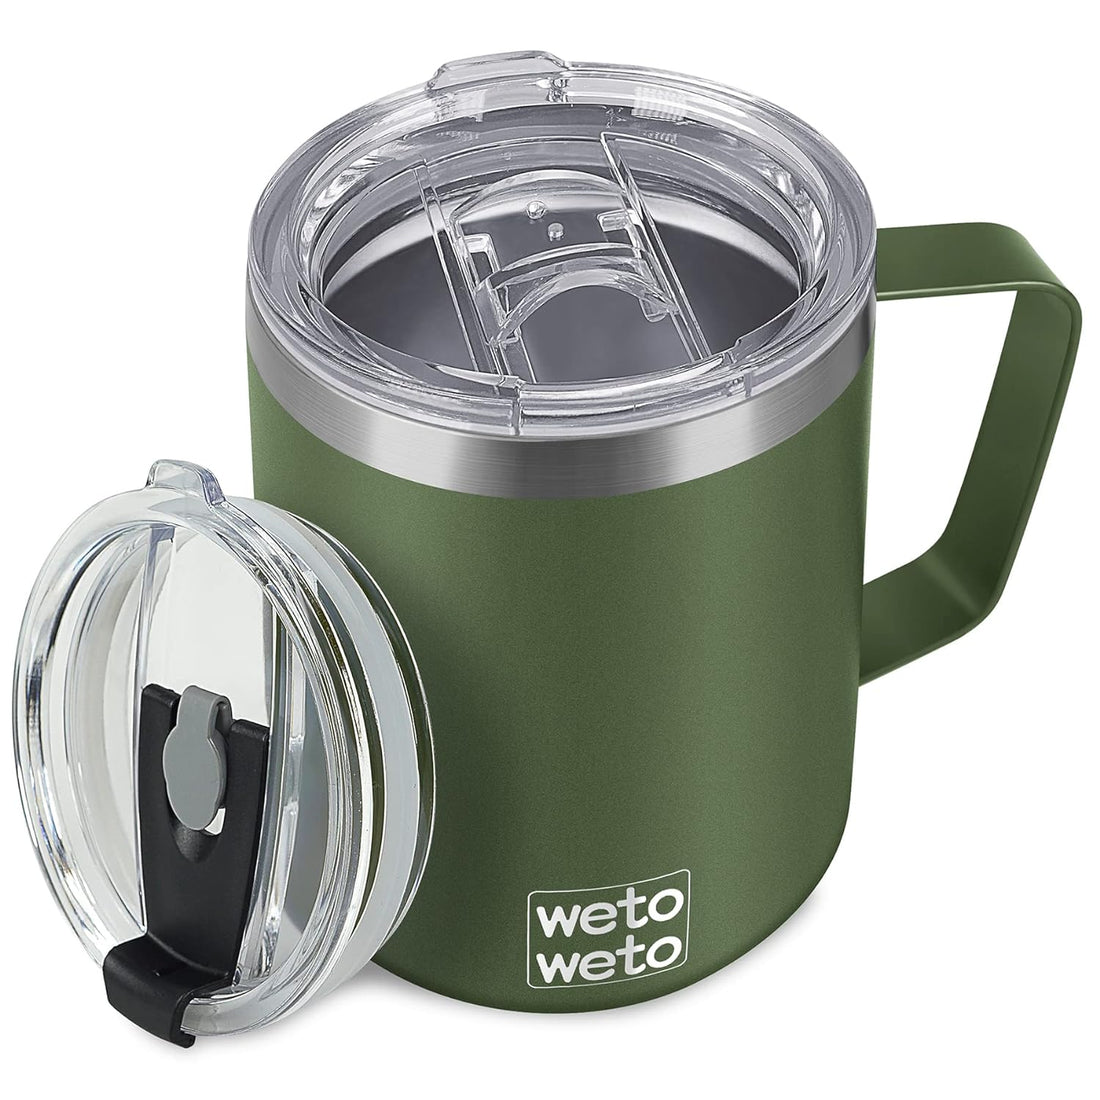 WETOWETO Coffee Mug with Handle, 14oz Insulated Stainless Steel Reusable Coffee Cup, Double Wall Coffee Travel Mug, Powder Coated Olive Green